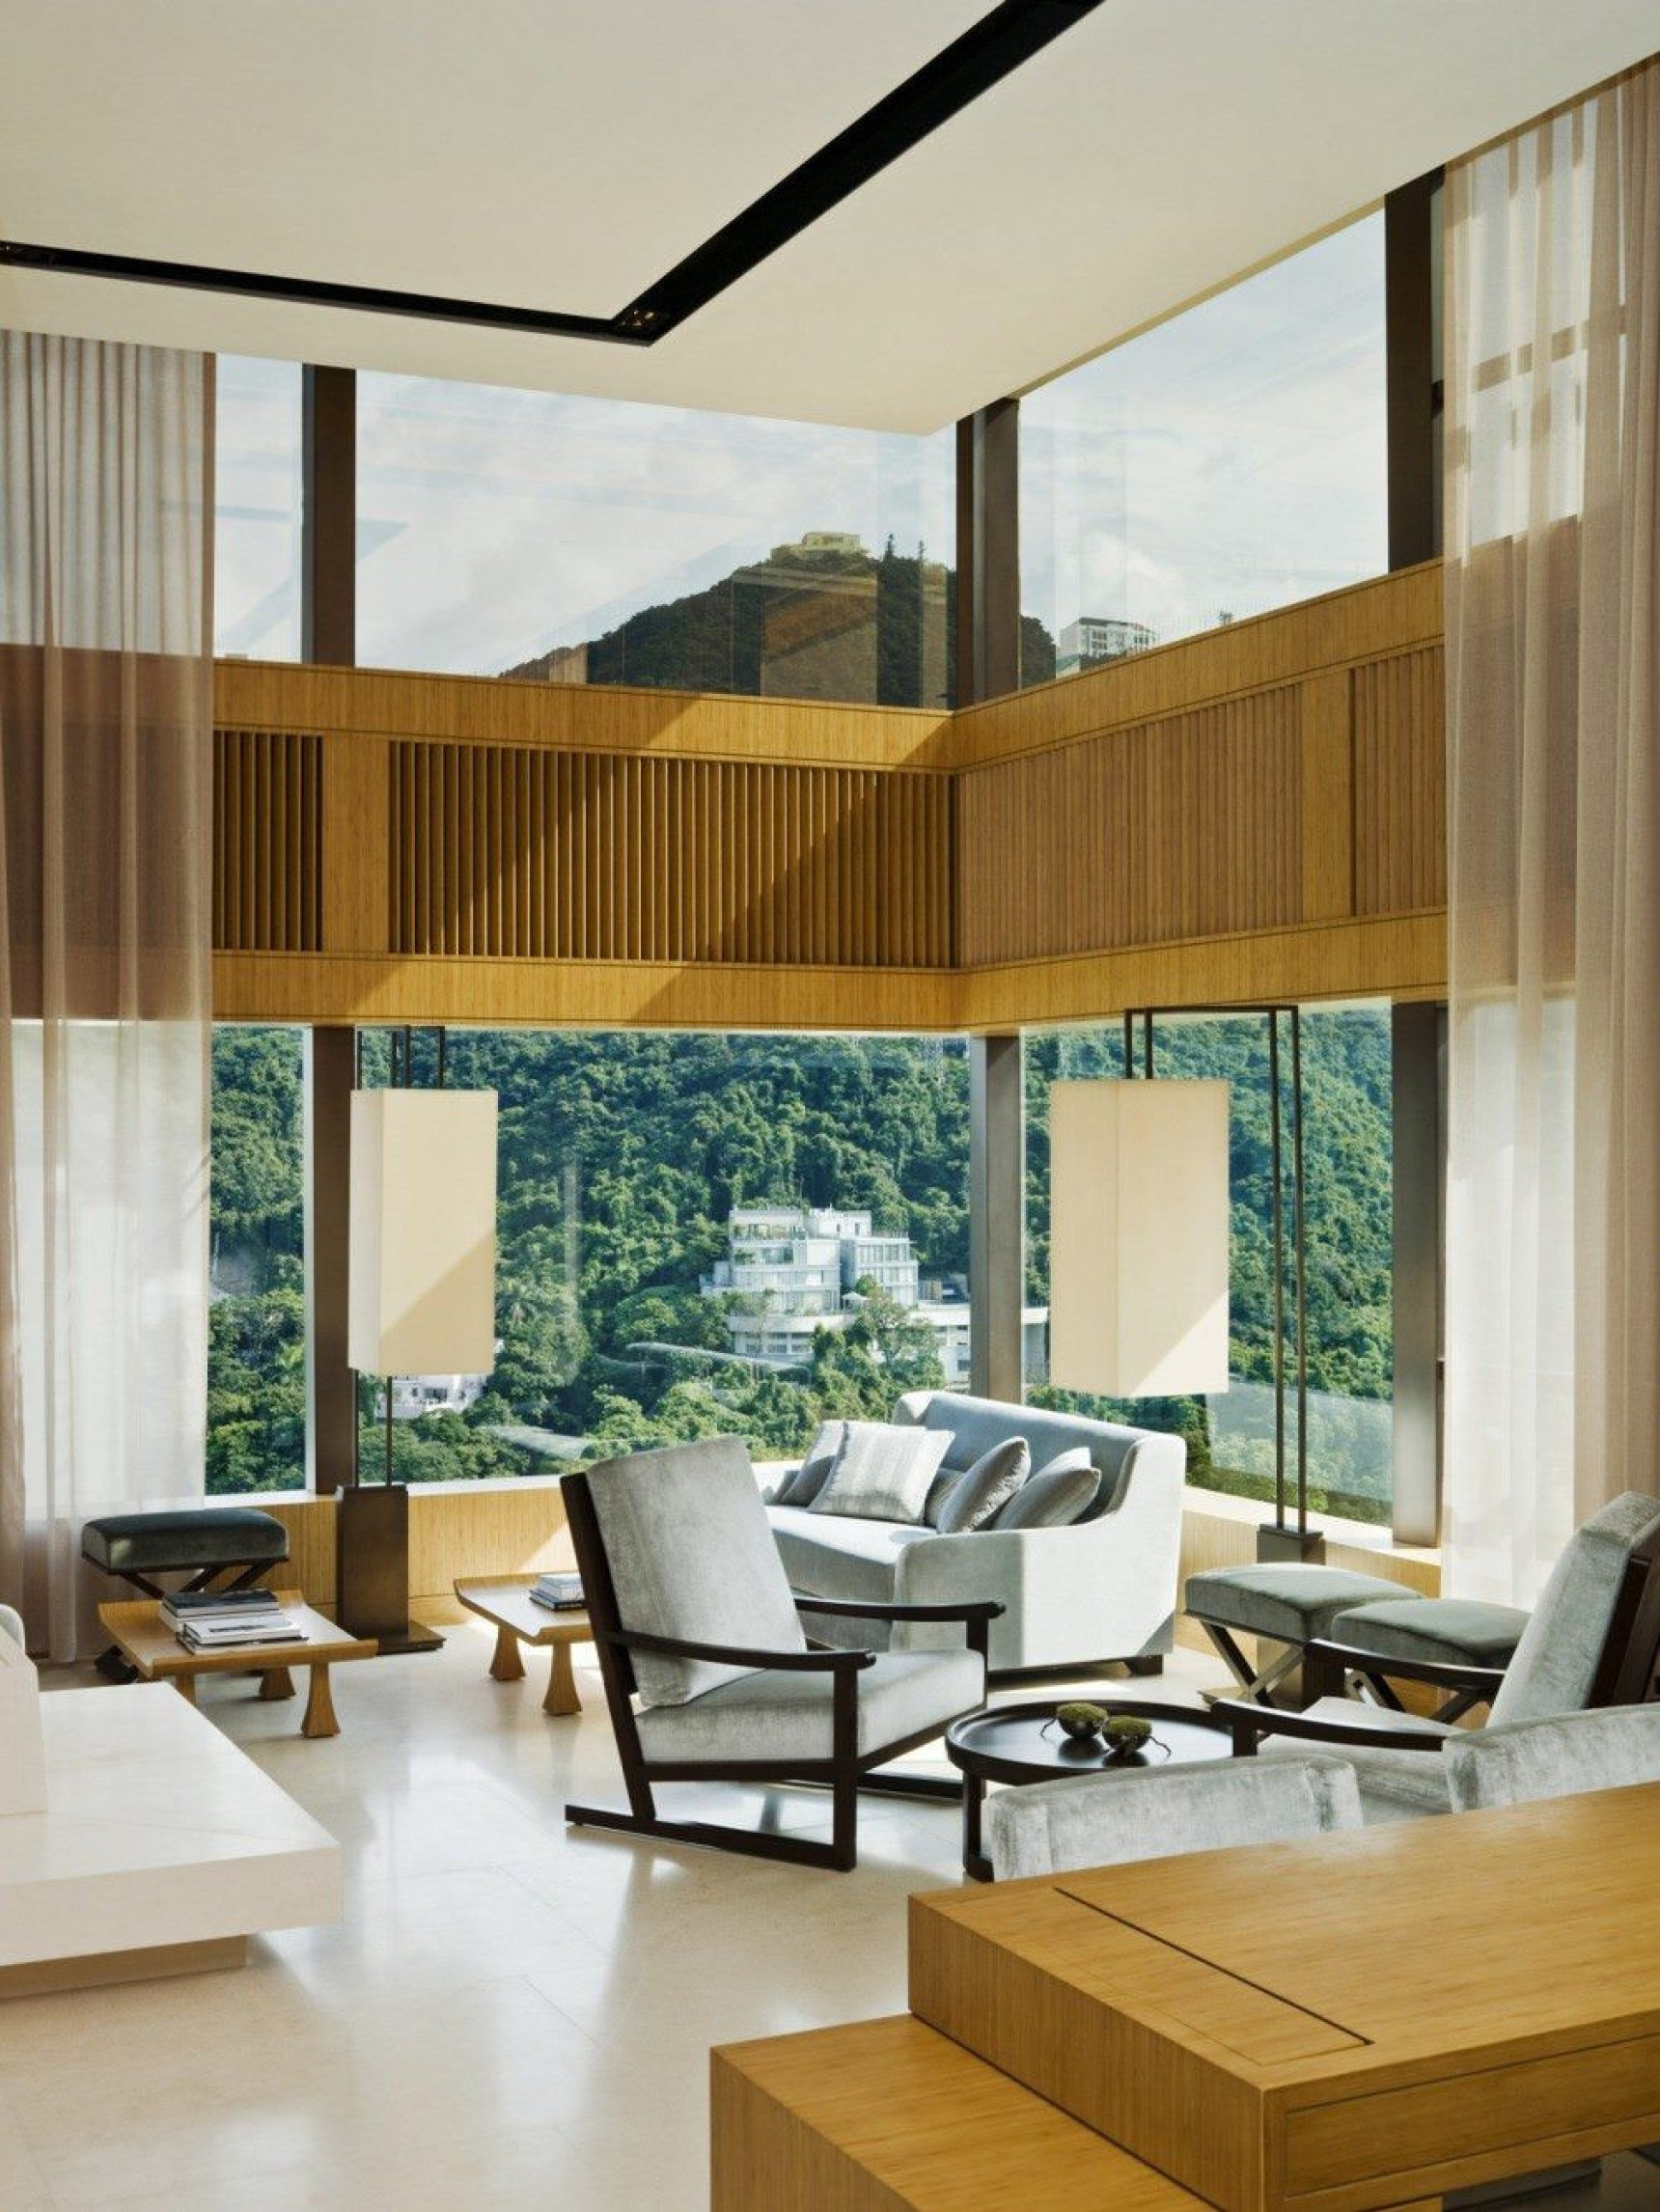 The Upper House – the definitive luxury living hotel in Hong Kong